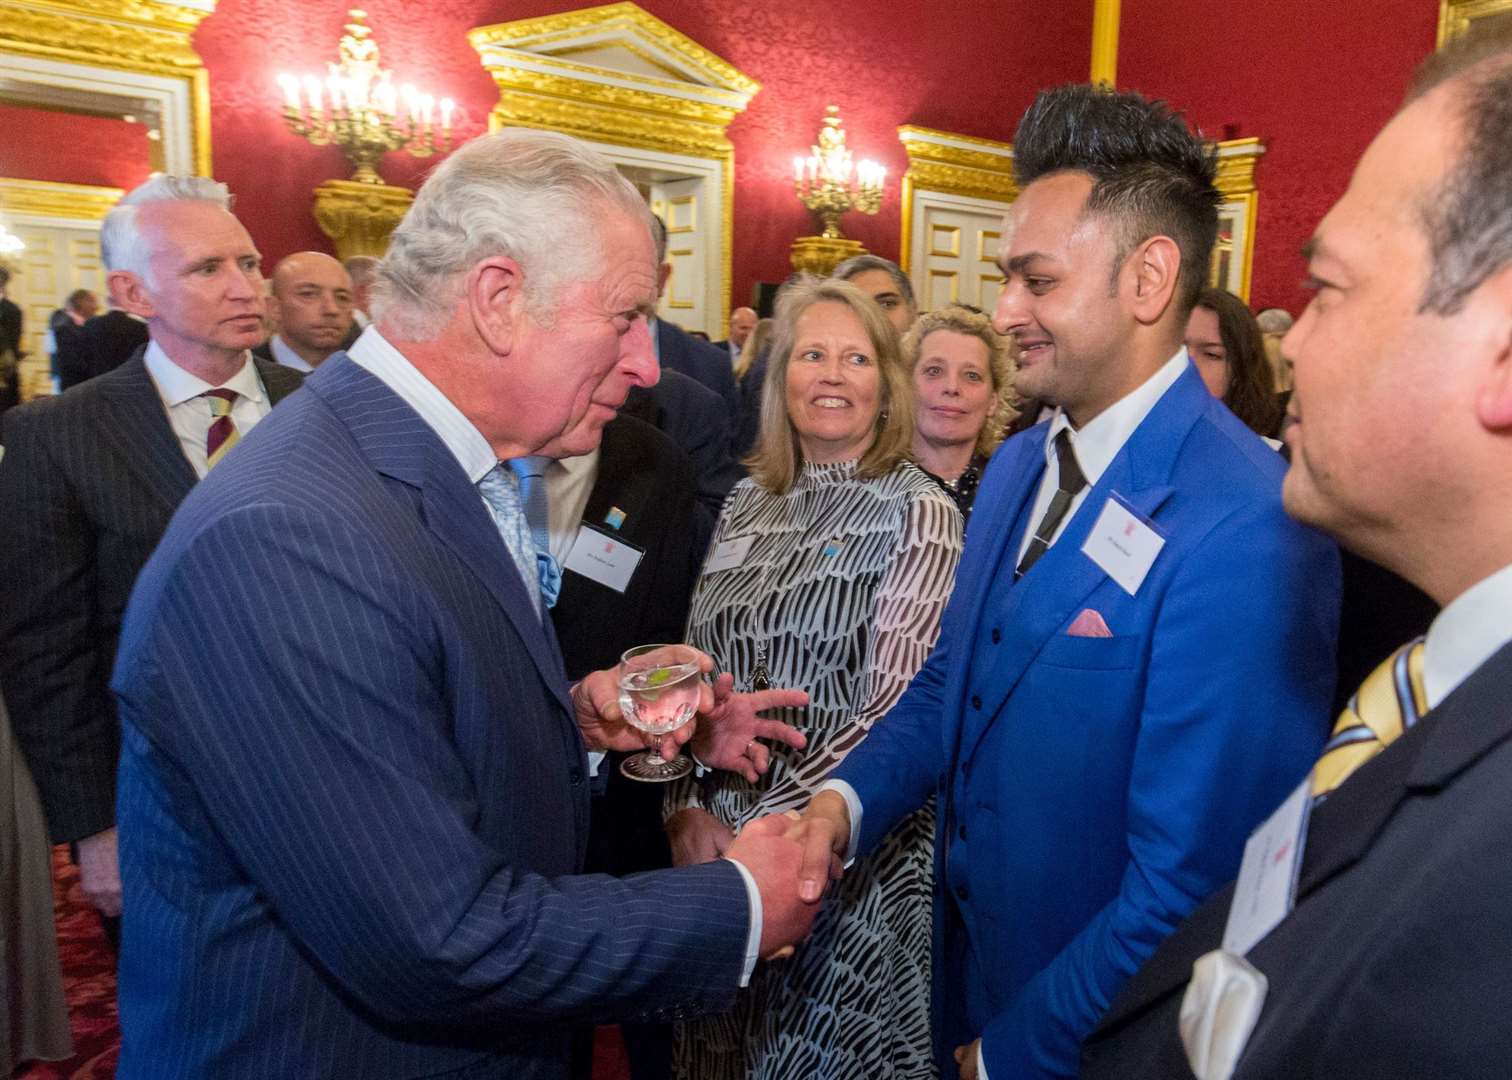 Amish Patel shaking hands with Prince Charles. Picture: Ian Jones Photography